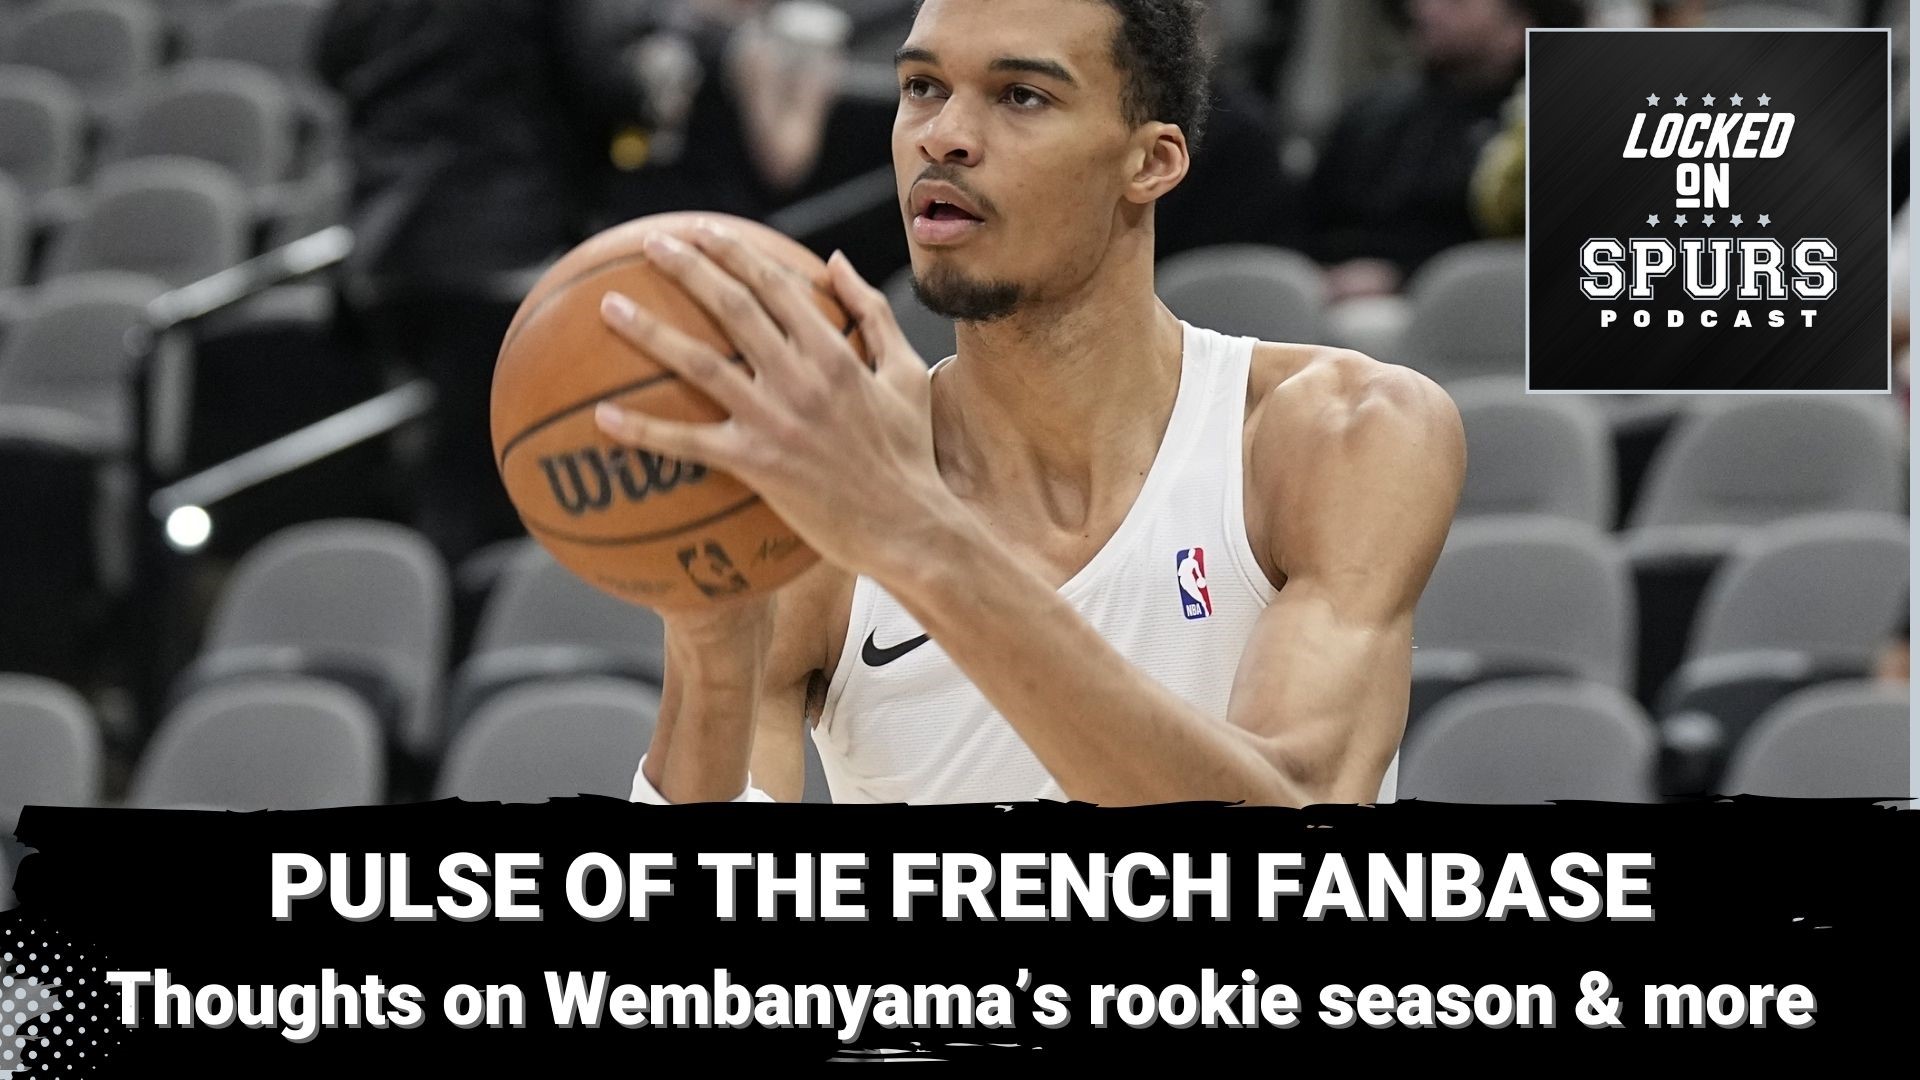 How did French fans view Wembanyama's first NBA season?